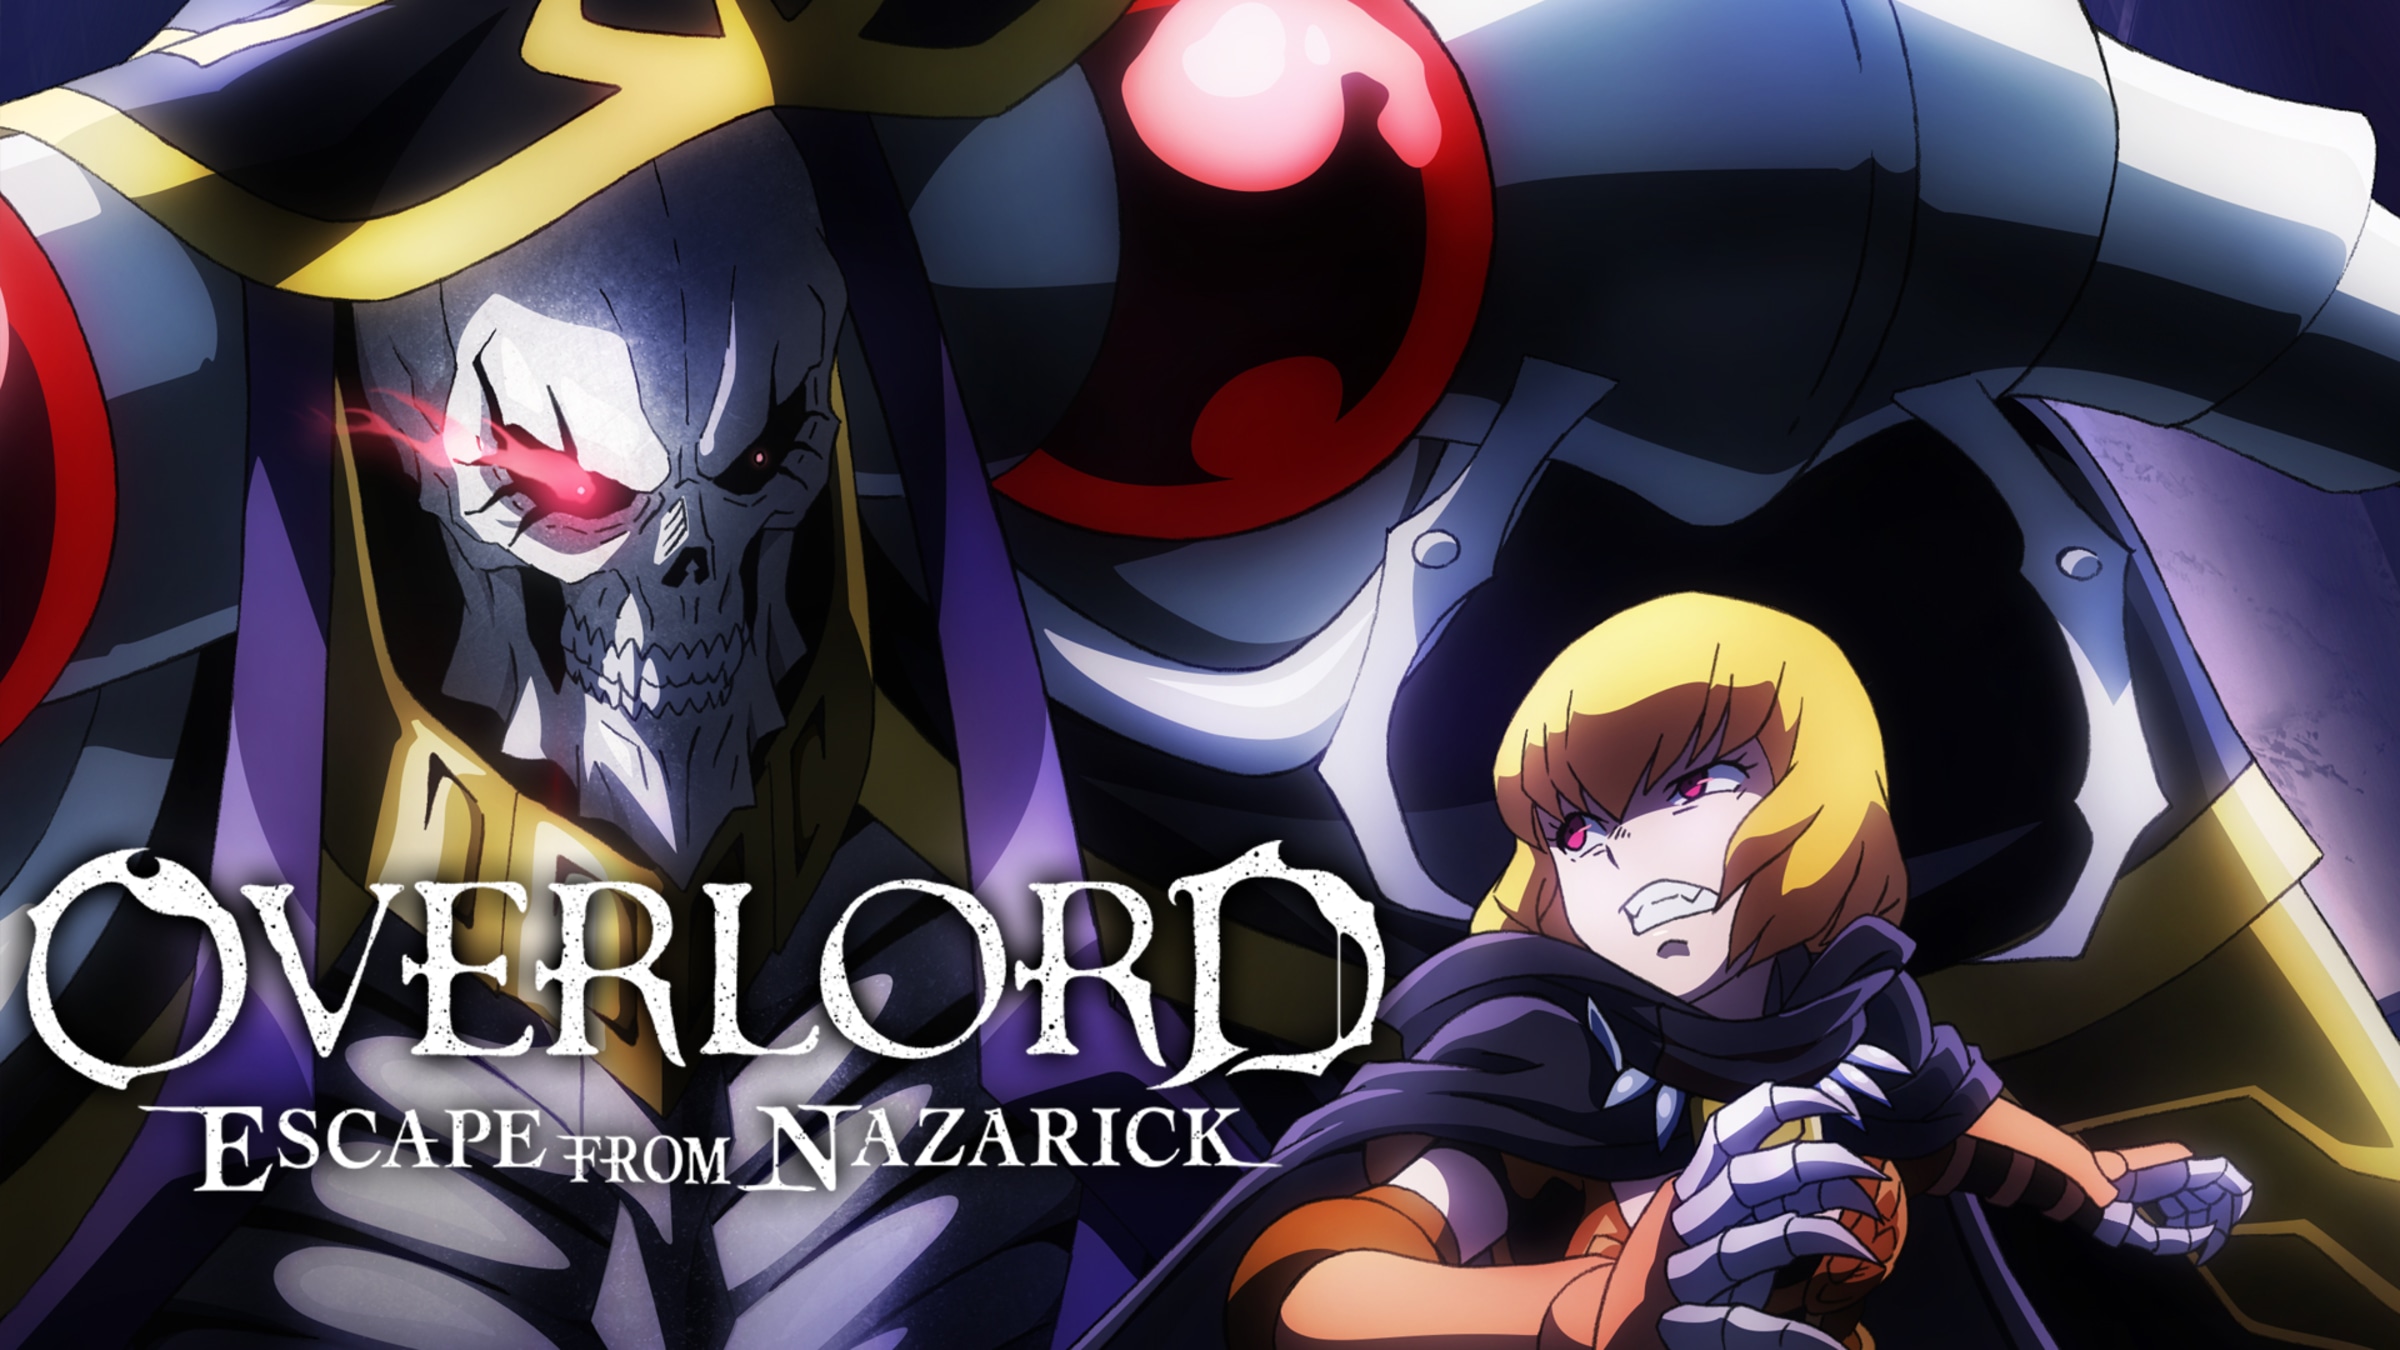 OVERLORD: NAZARICK FROM ファミ通DXパック ESCAPE - 6